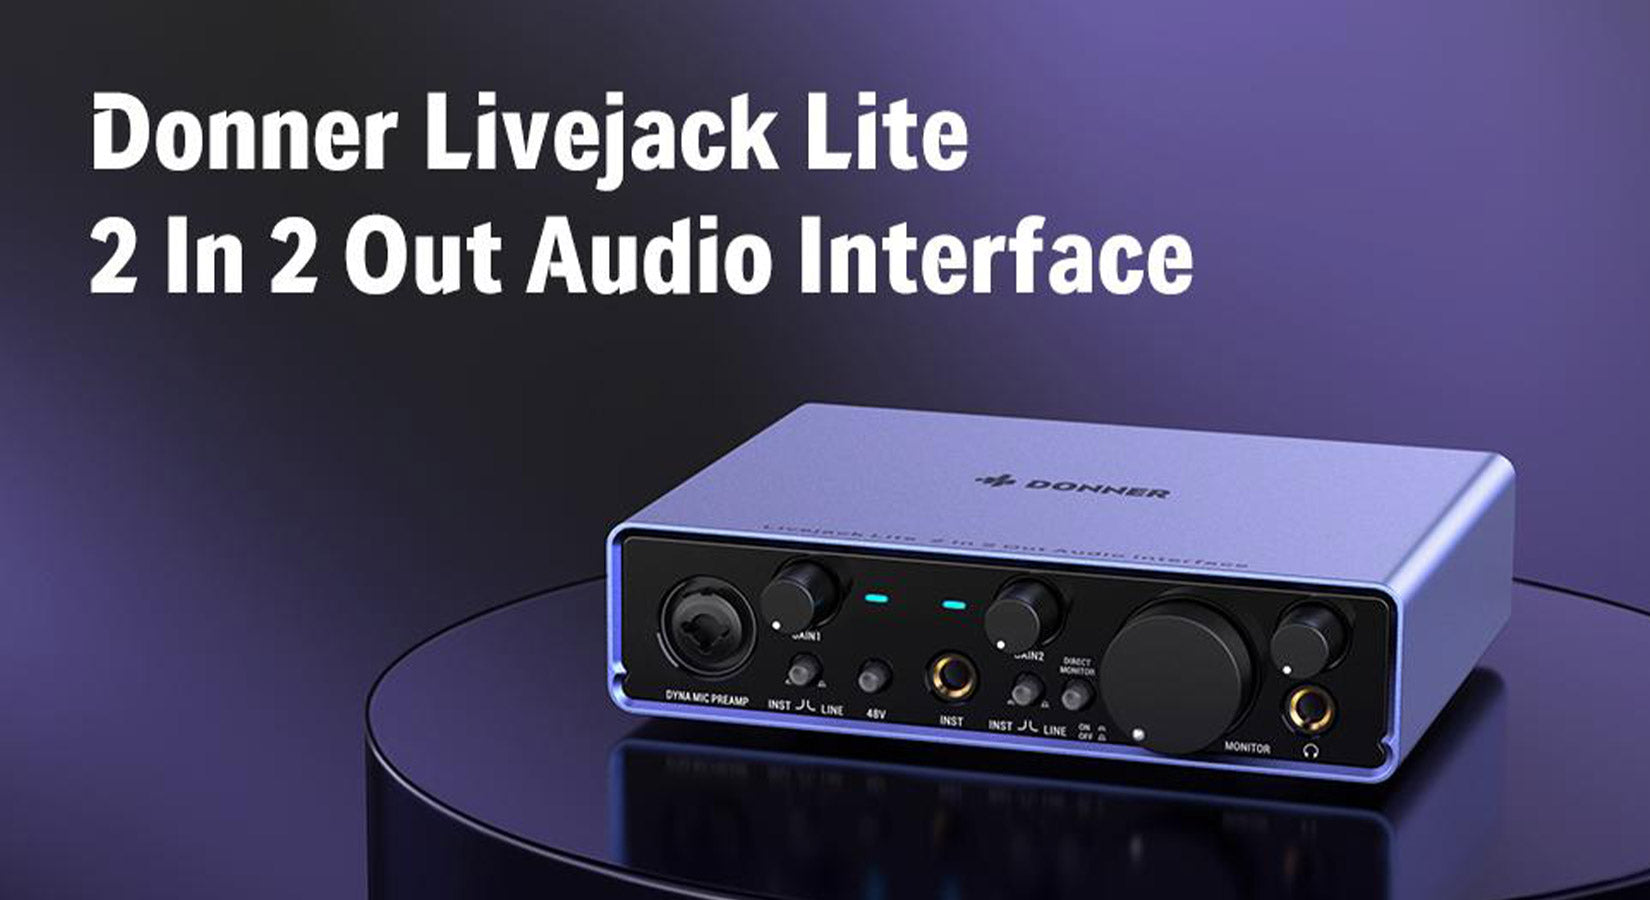 methane Passed suffering Your Recording Career Starts Here-Donner Livejack Audio Interface - Donner  Musical instrument